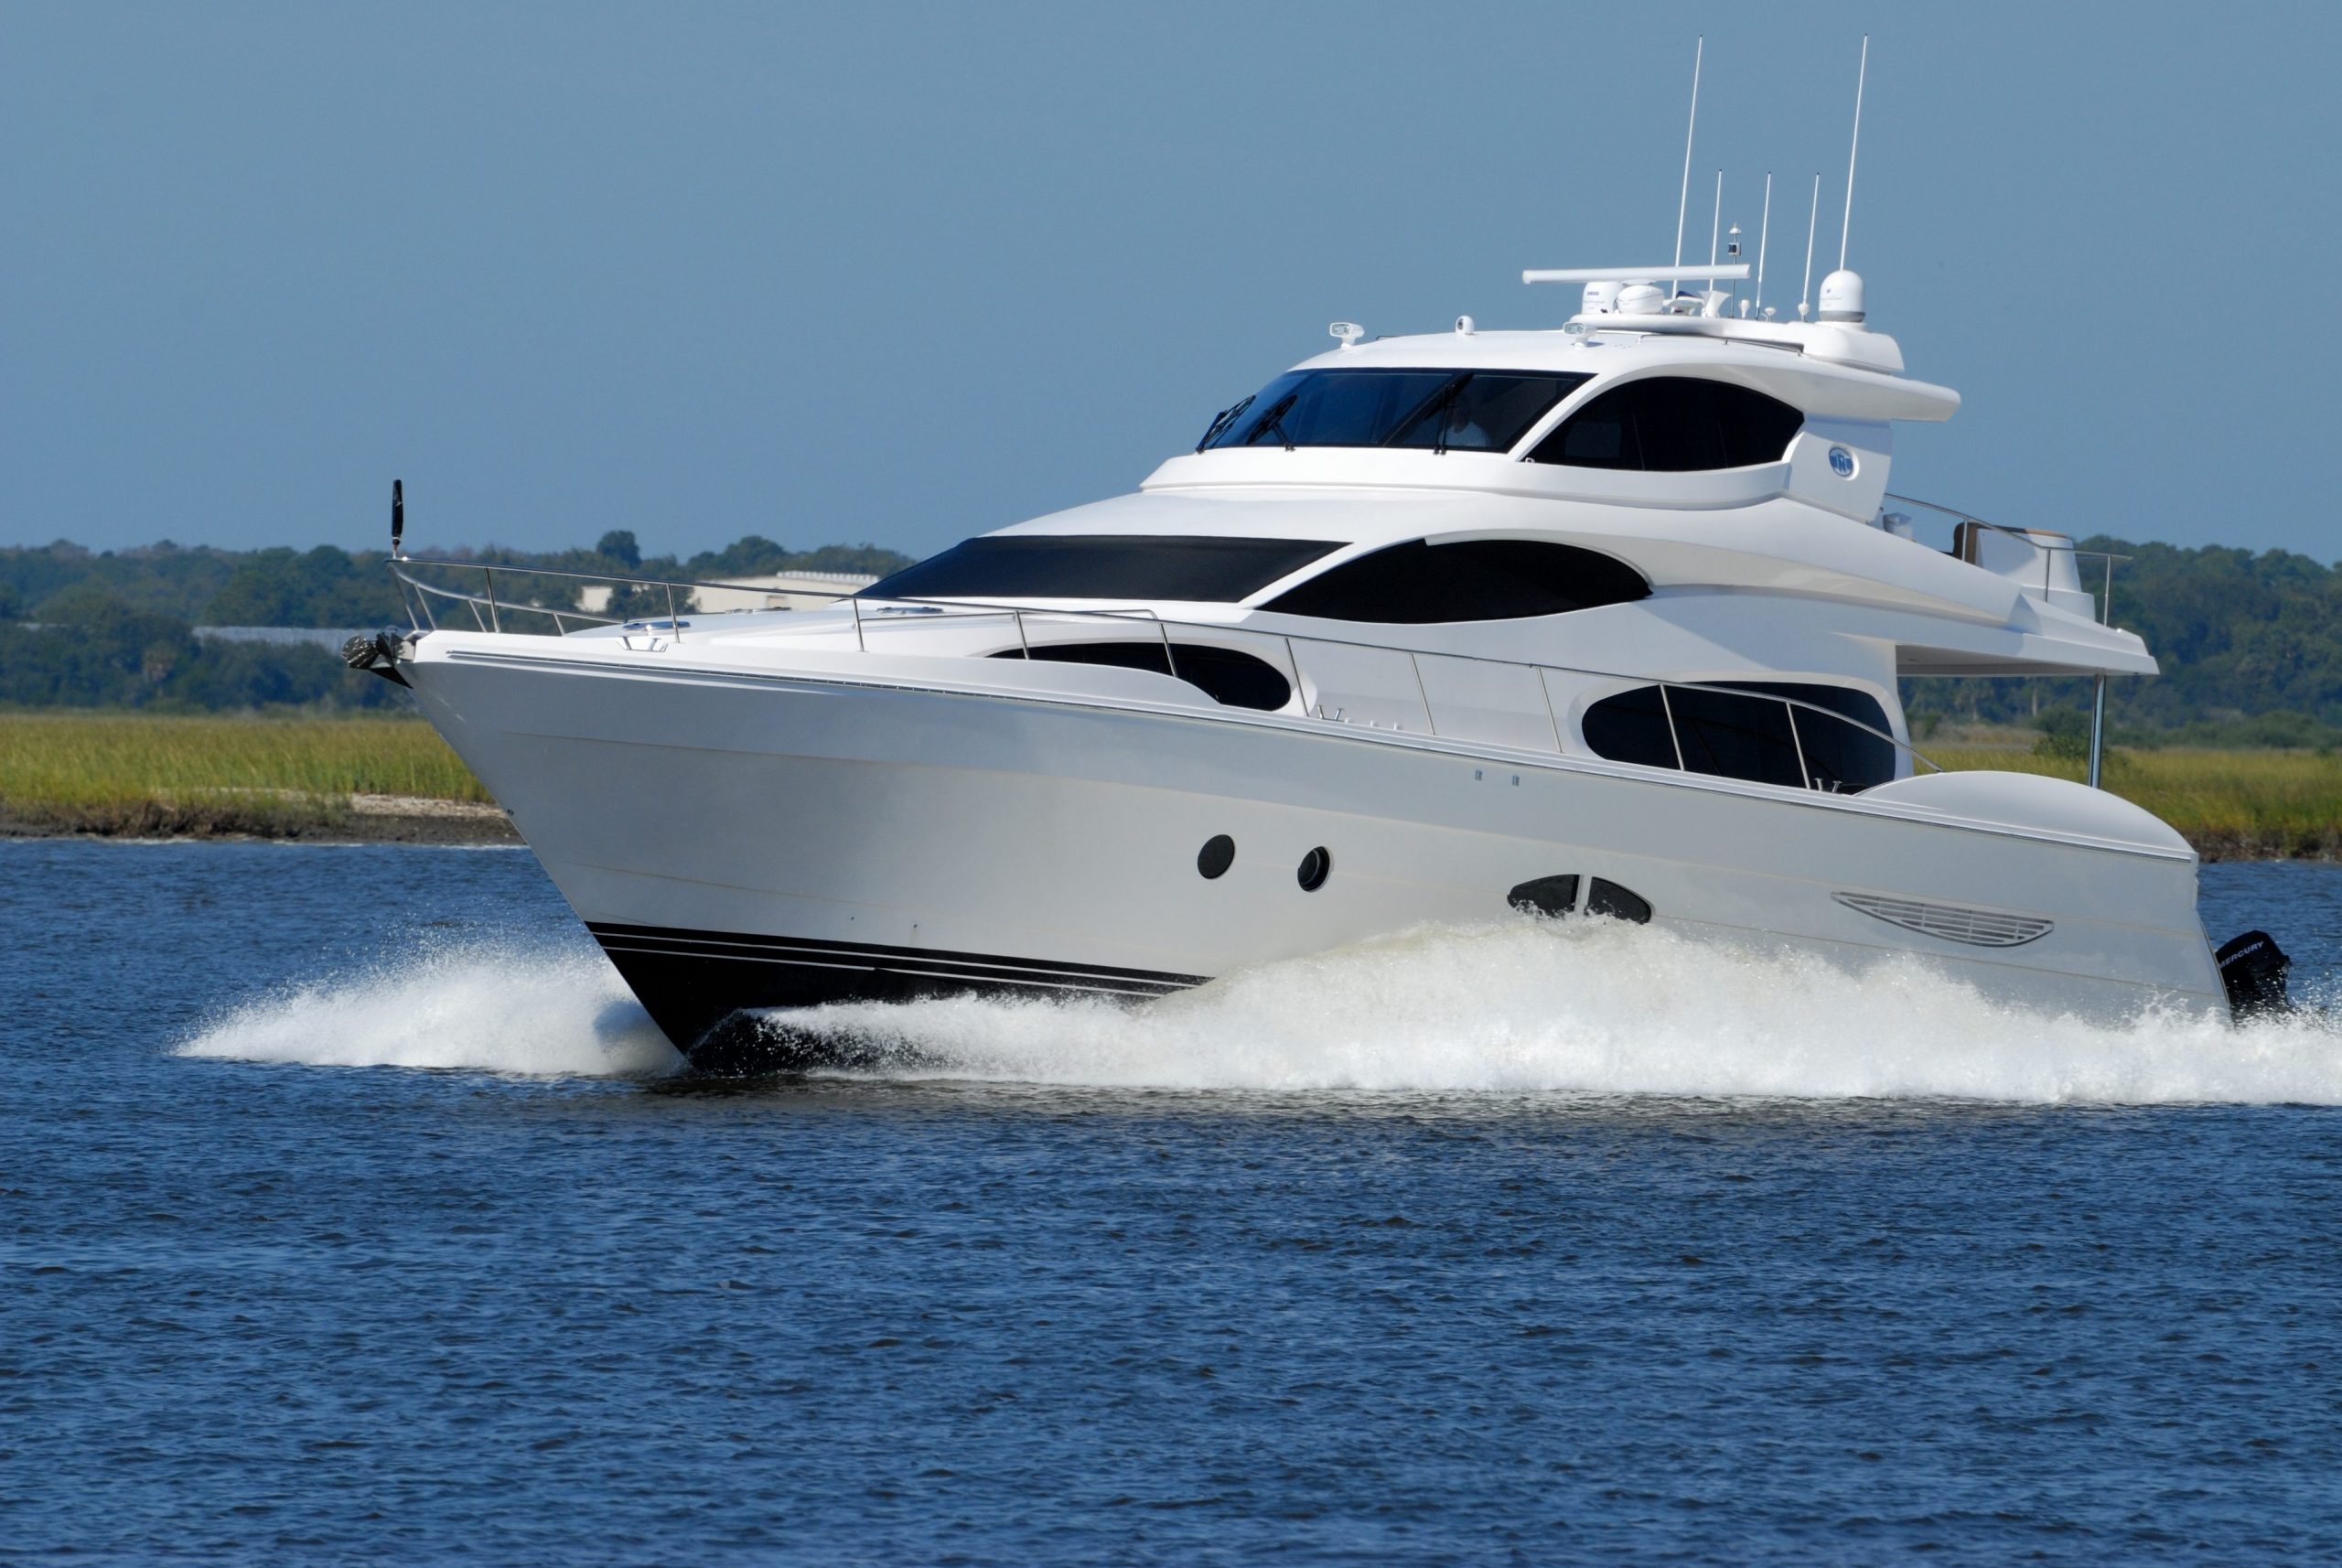 Boat Insurance in Missouri and the Midwest